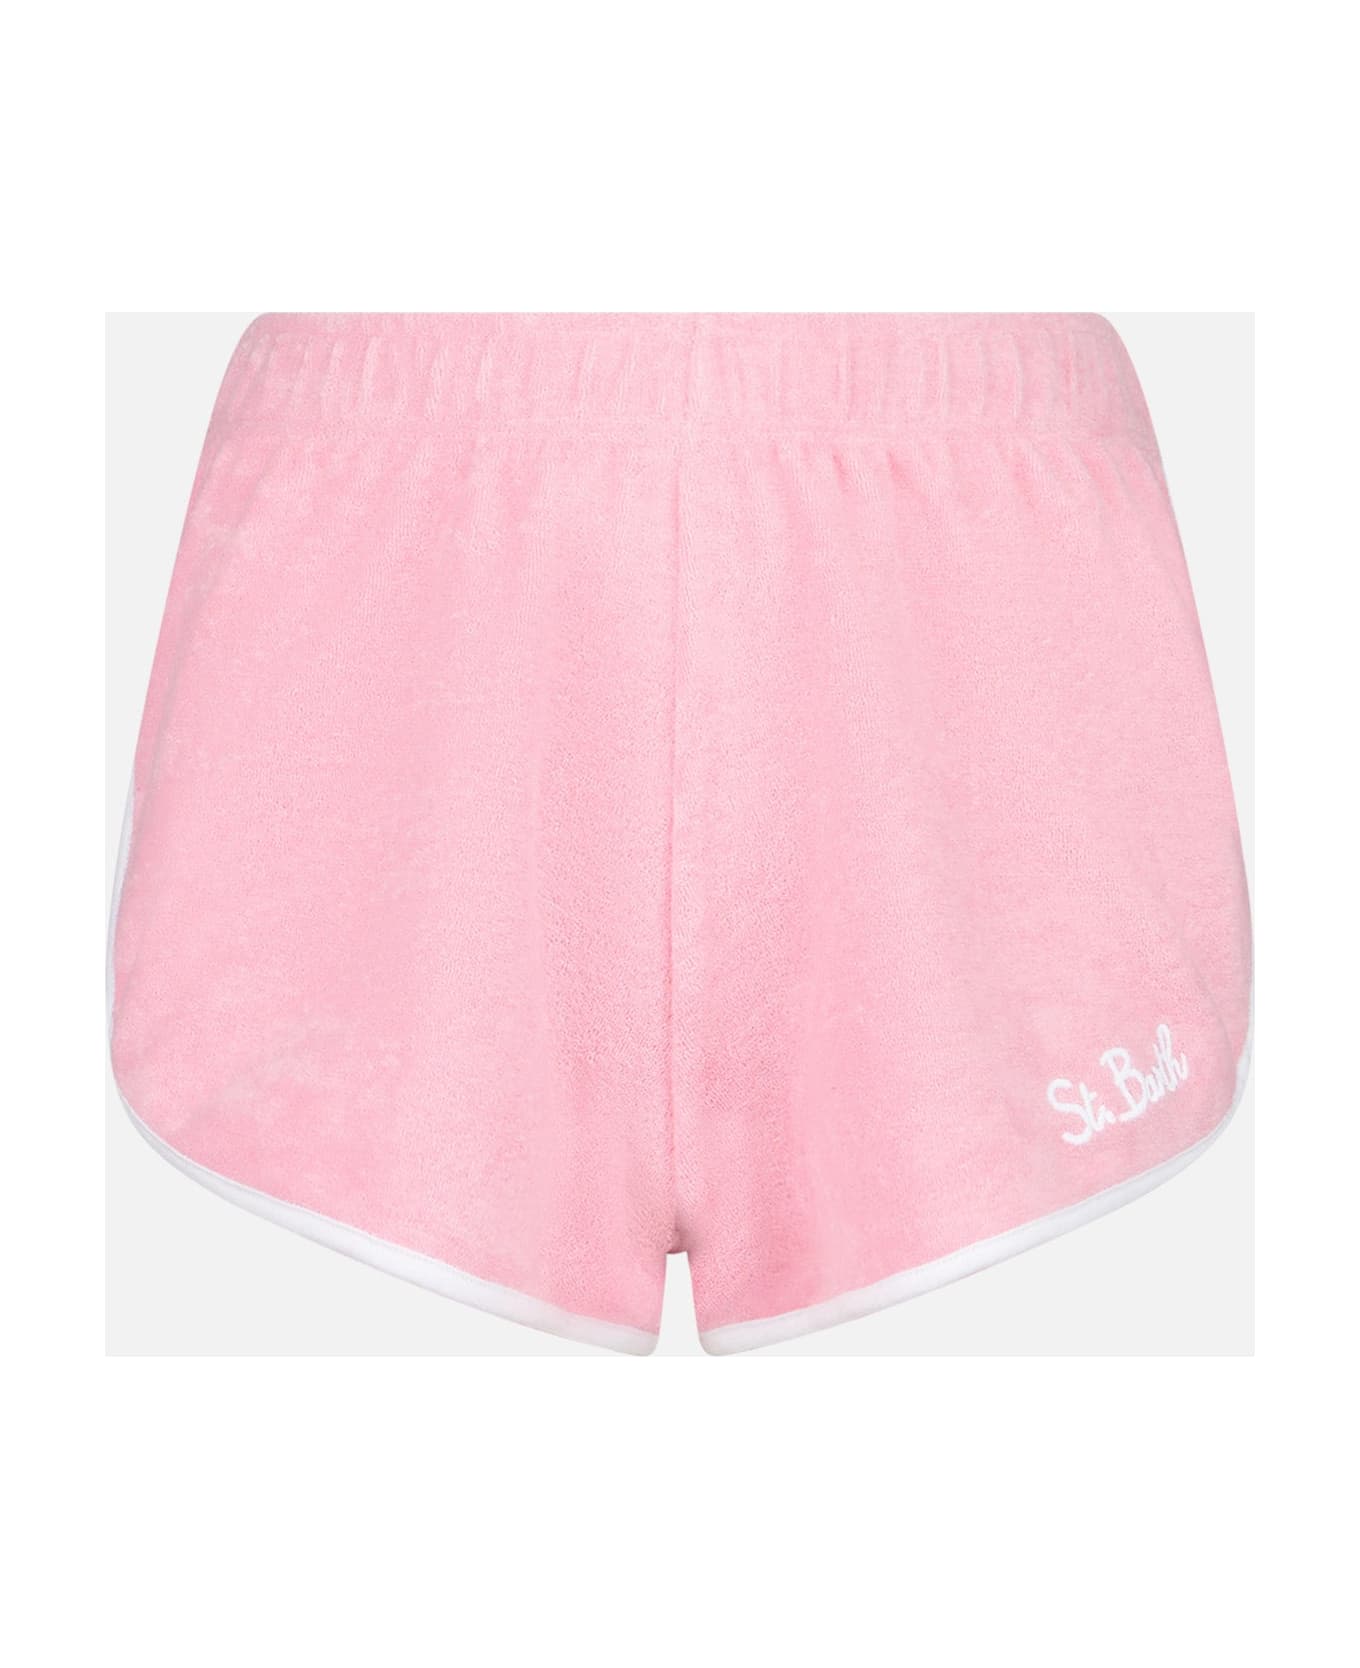 MC2 Saint Barth Woman Pink Terry Shorts With Piping | Melissa Satta Special Edition - PINK ショートパンツ